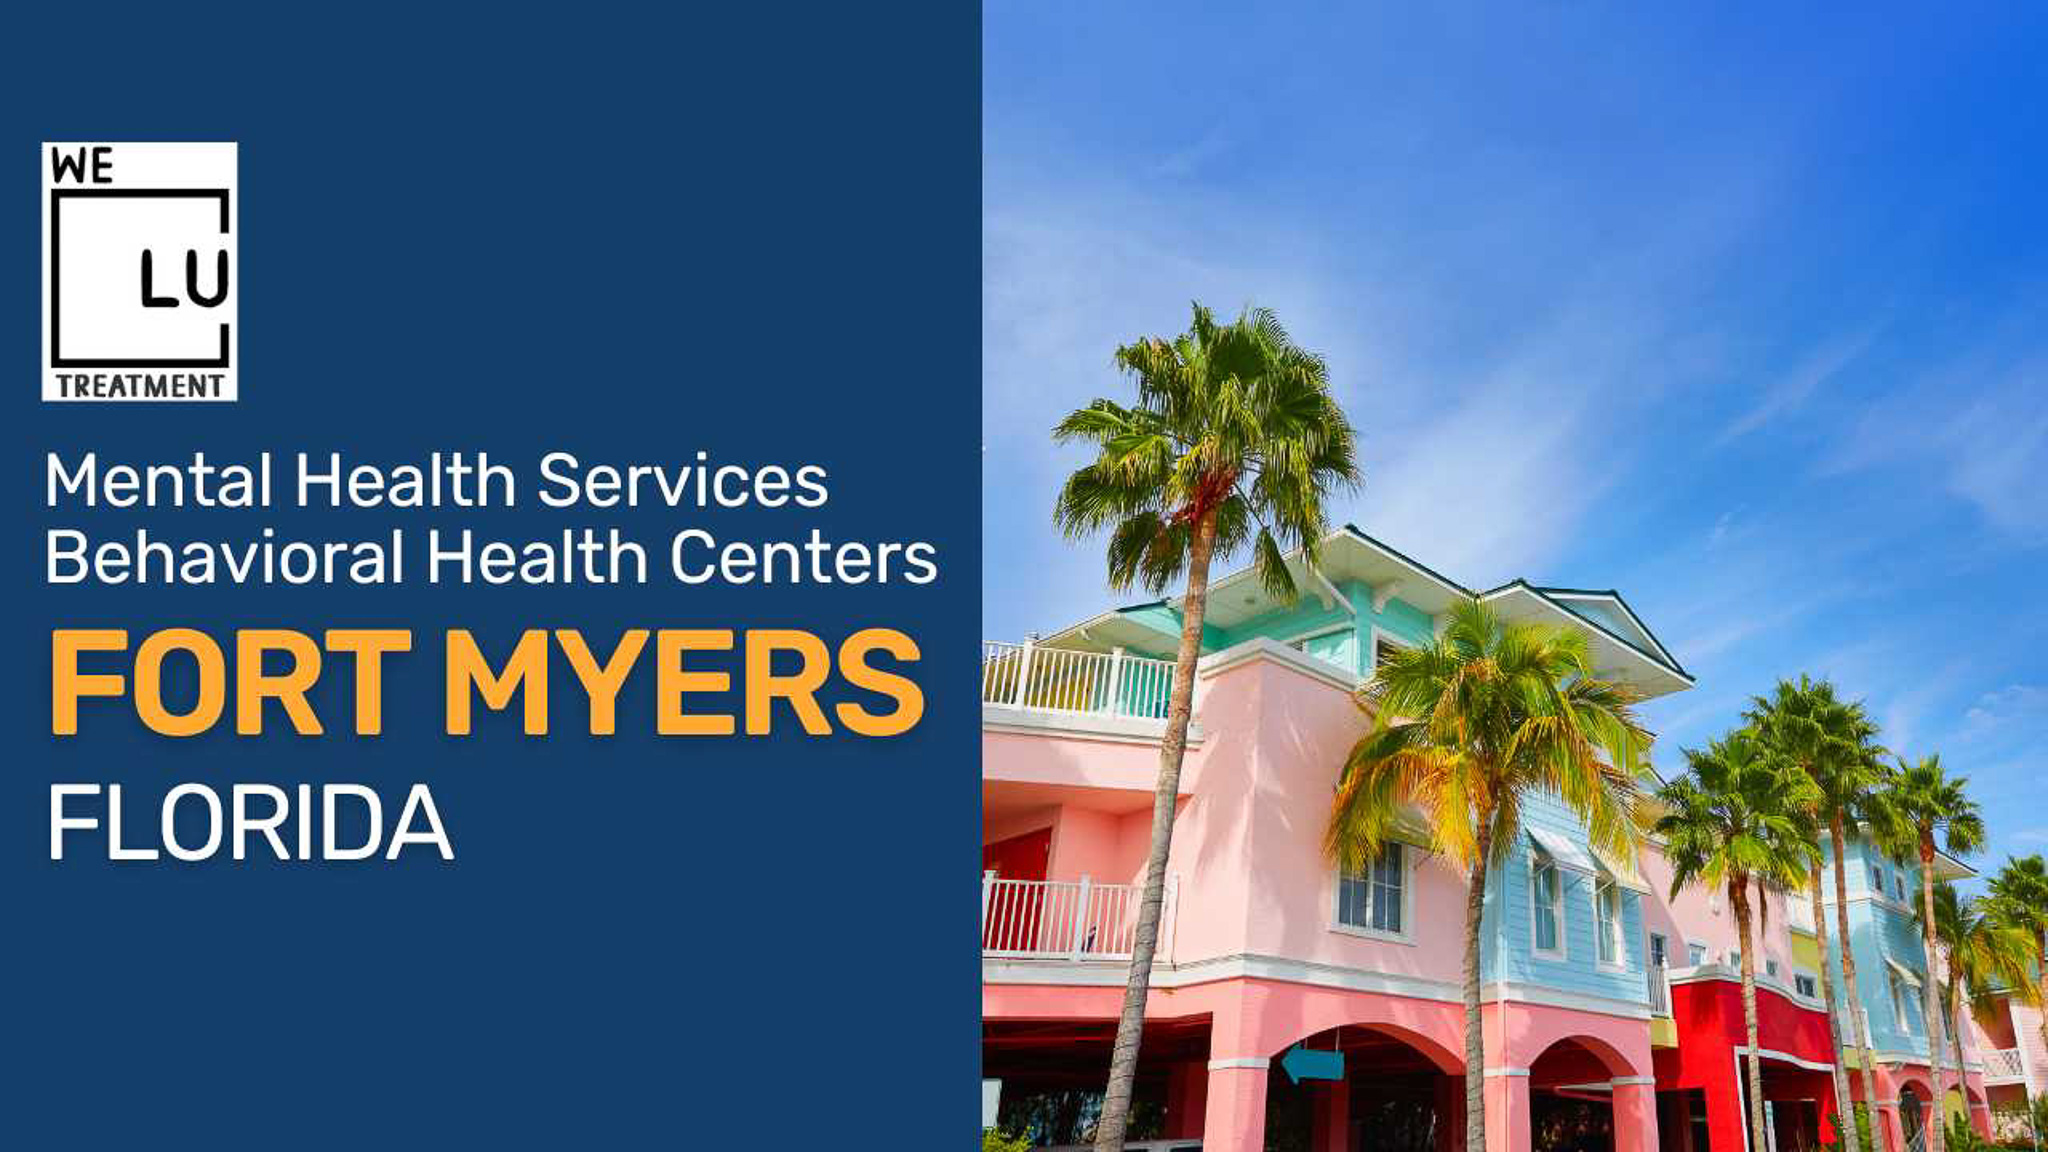 Fort Myers FL (MH) We Level Up treatment center for drug and alcohol rehab detox and mental health services - Image 1